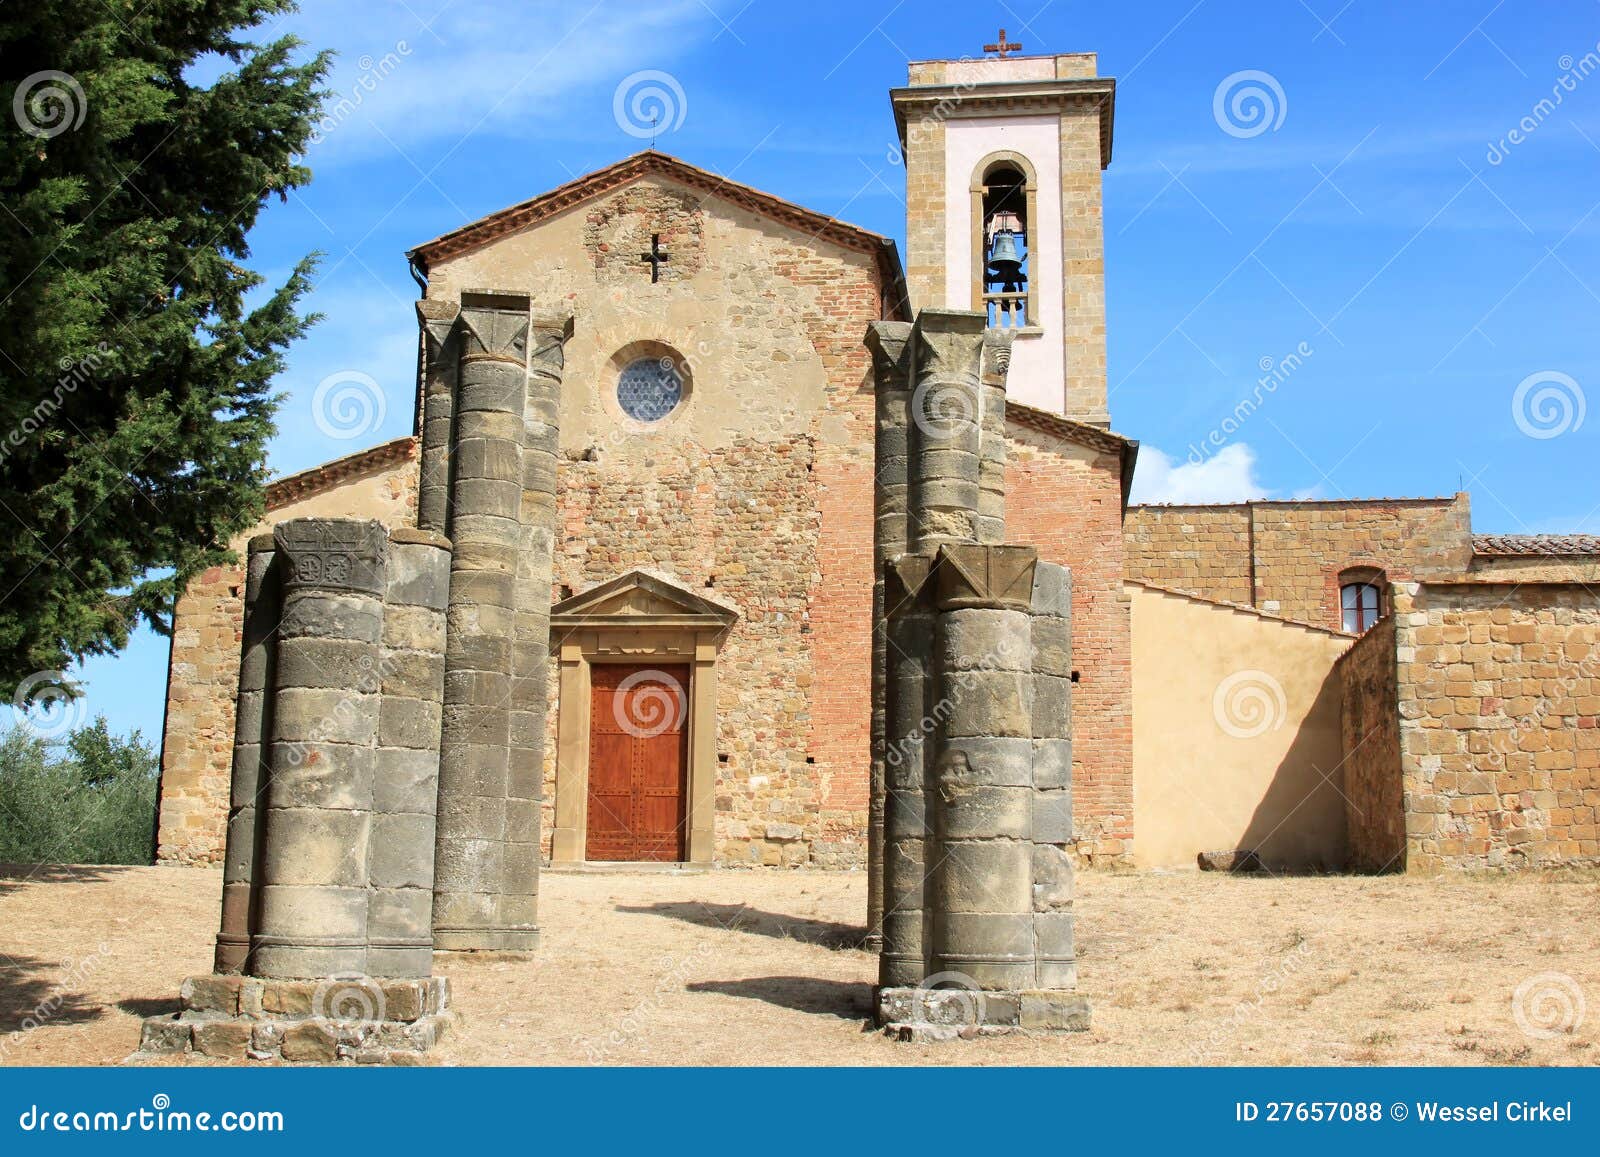 old romanesque chapel in sant' appiano, italy